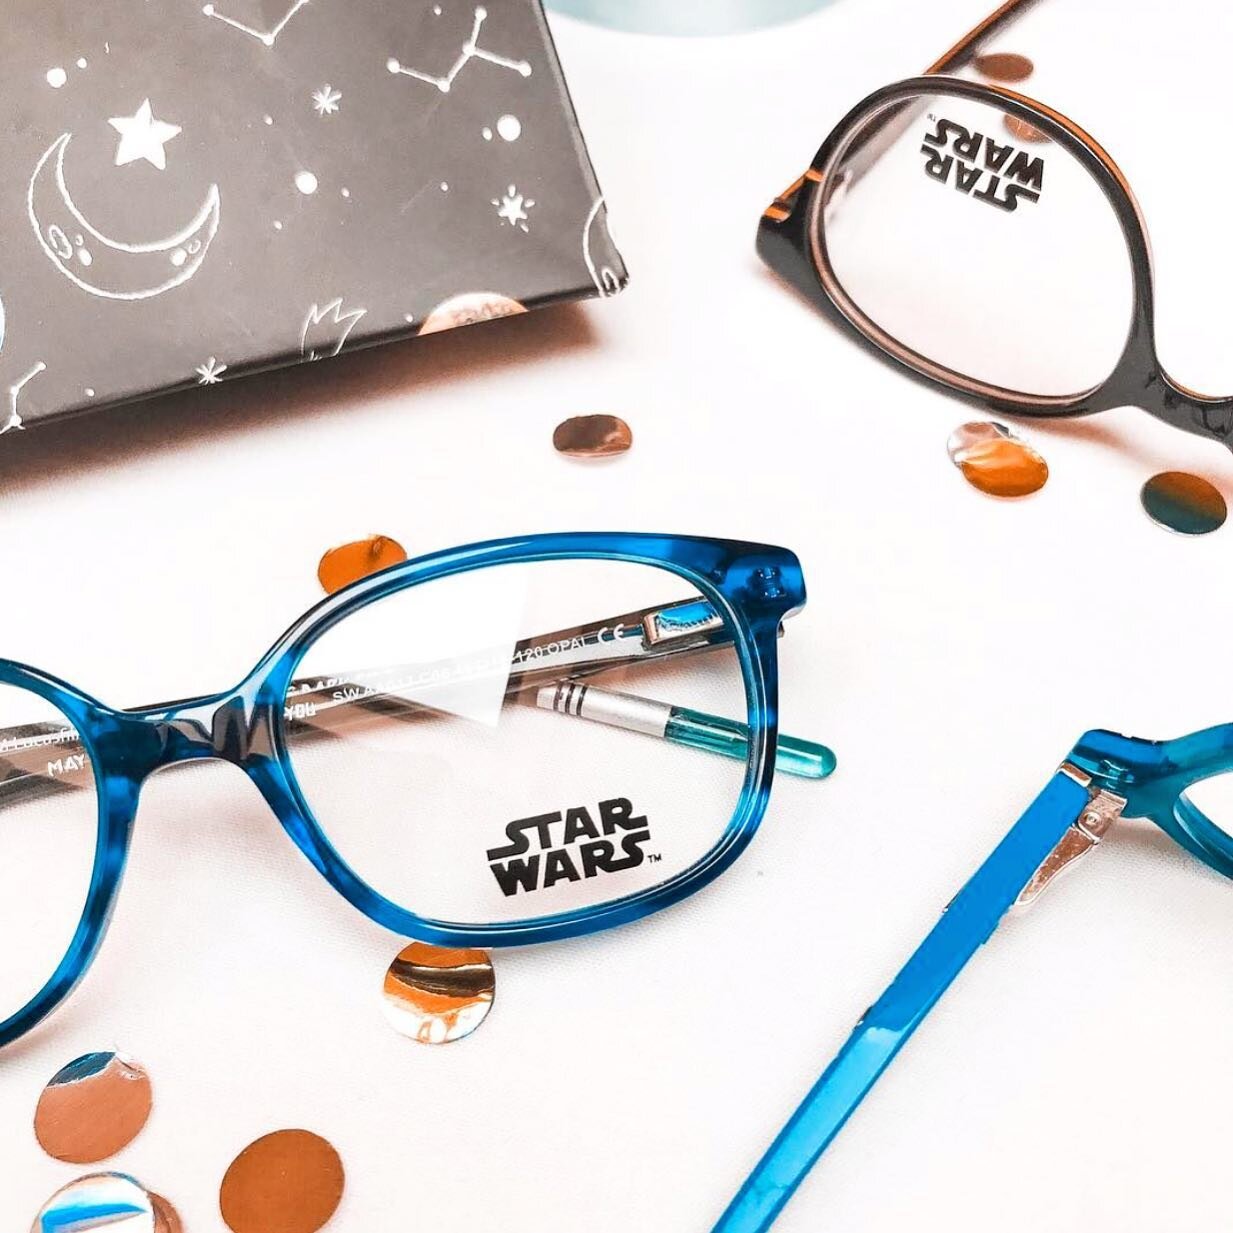 &ldquo;In my experience, there is no such thing as luck.... [except when you fall into the hands of our trusty dispensers and our Star Wars Collection]&rdquo; - Obi-Wan Kenobi
-
Inspired directly from the Star Wars universe, this collection brings th